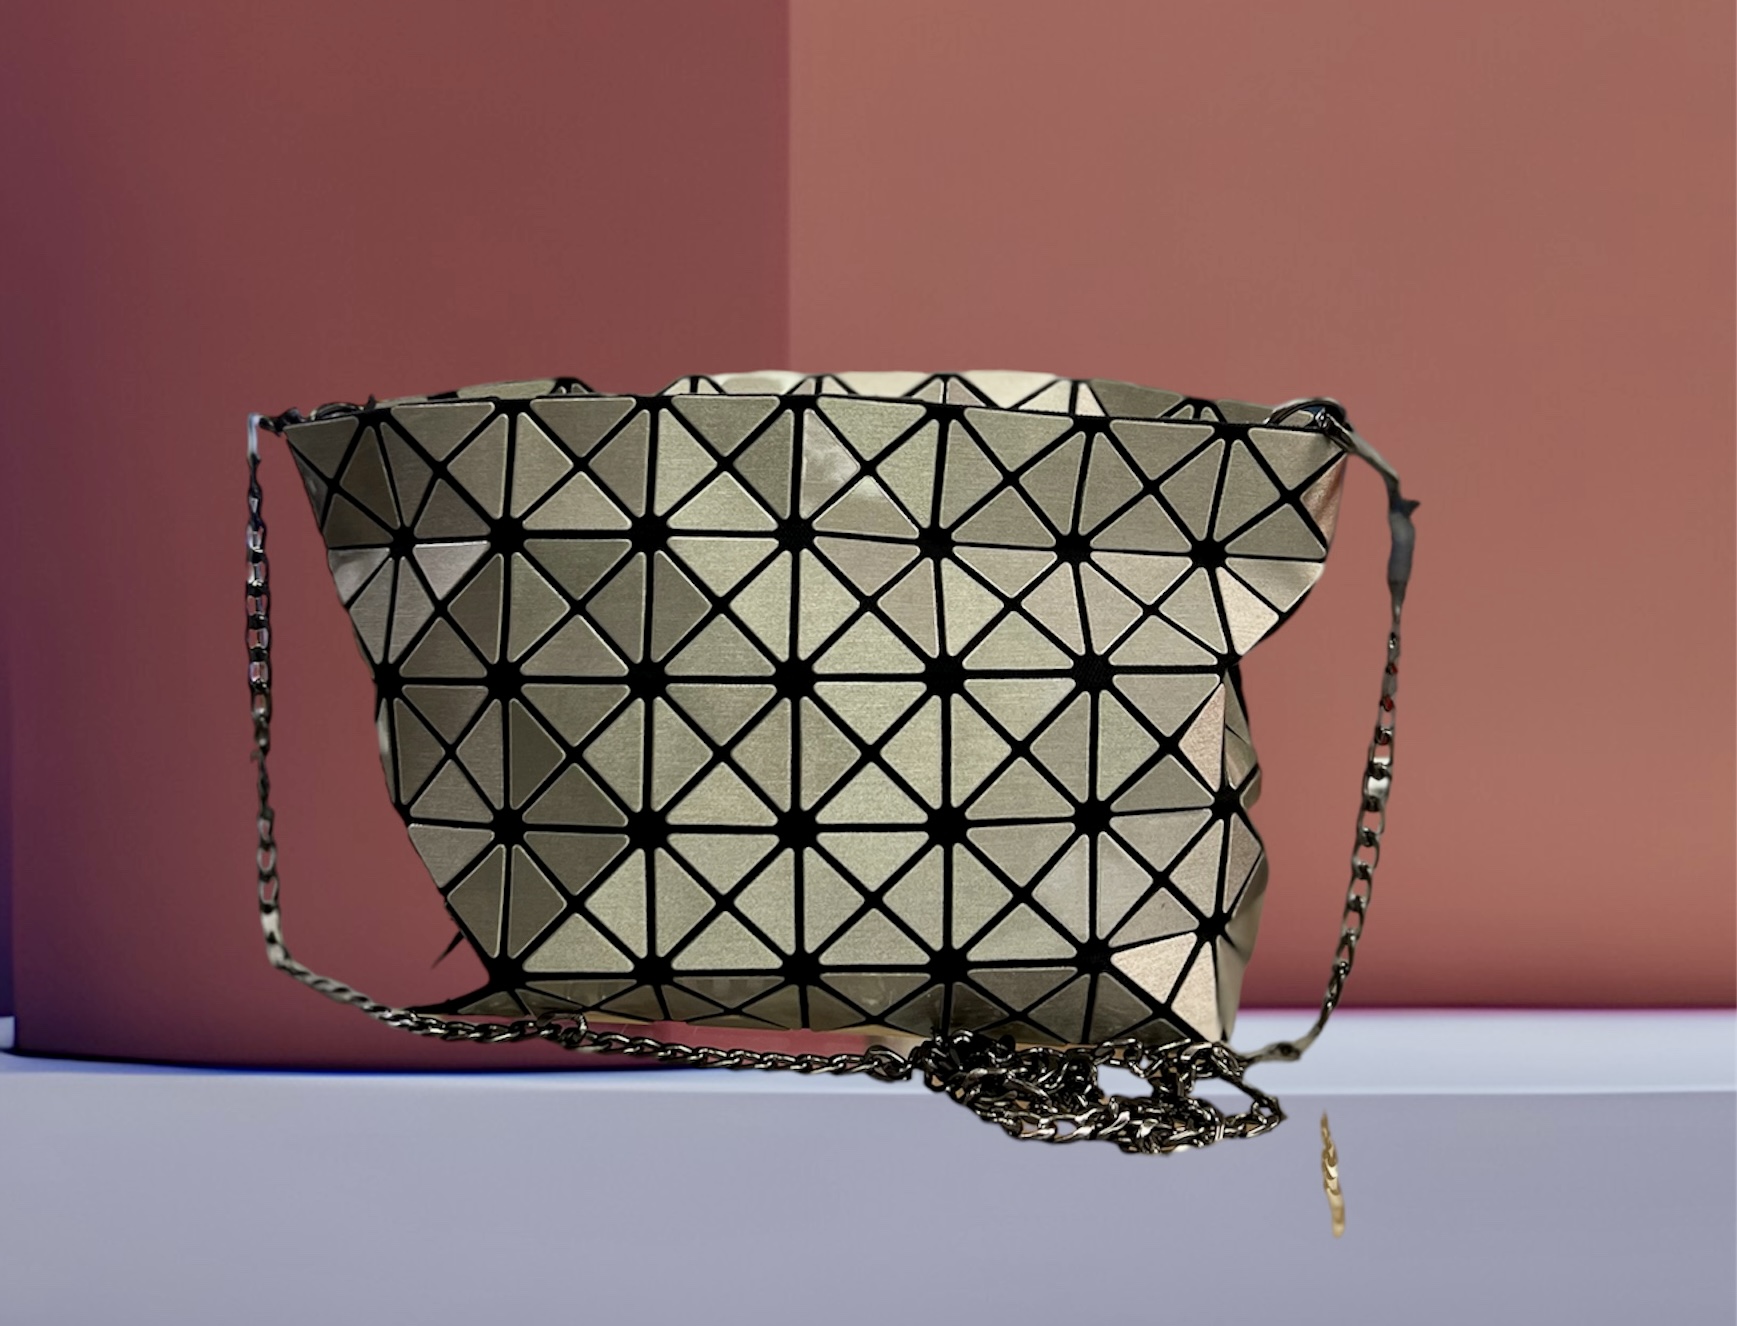 BAO BAO ISSEY MIYAKE
PLATINUM COFFRET CROSSBODY BAG
Featuring a textured, mirror-like surface, PLATINUM COFFRET has a soft, shimmering luster and matching metal chain.
This crossbody bag has zippered opening.
Material: Surface : Polyurethane / Base : 100% Polyester / Part : Synthetic Leather / Polyvinyl Chloride / Chain : Iron
Care: Wipe gently with a damp, tightly wrung soft cloth, and then wipe dry.
Dimensions: 5.9 x 9.1 x 1.2 in.
Original Retail:565.00
This bag is in excellent condition.